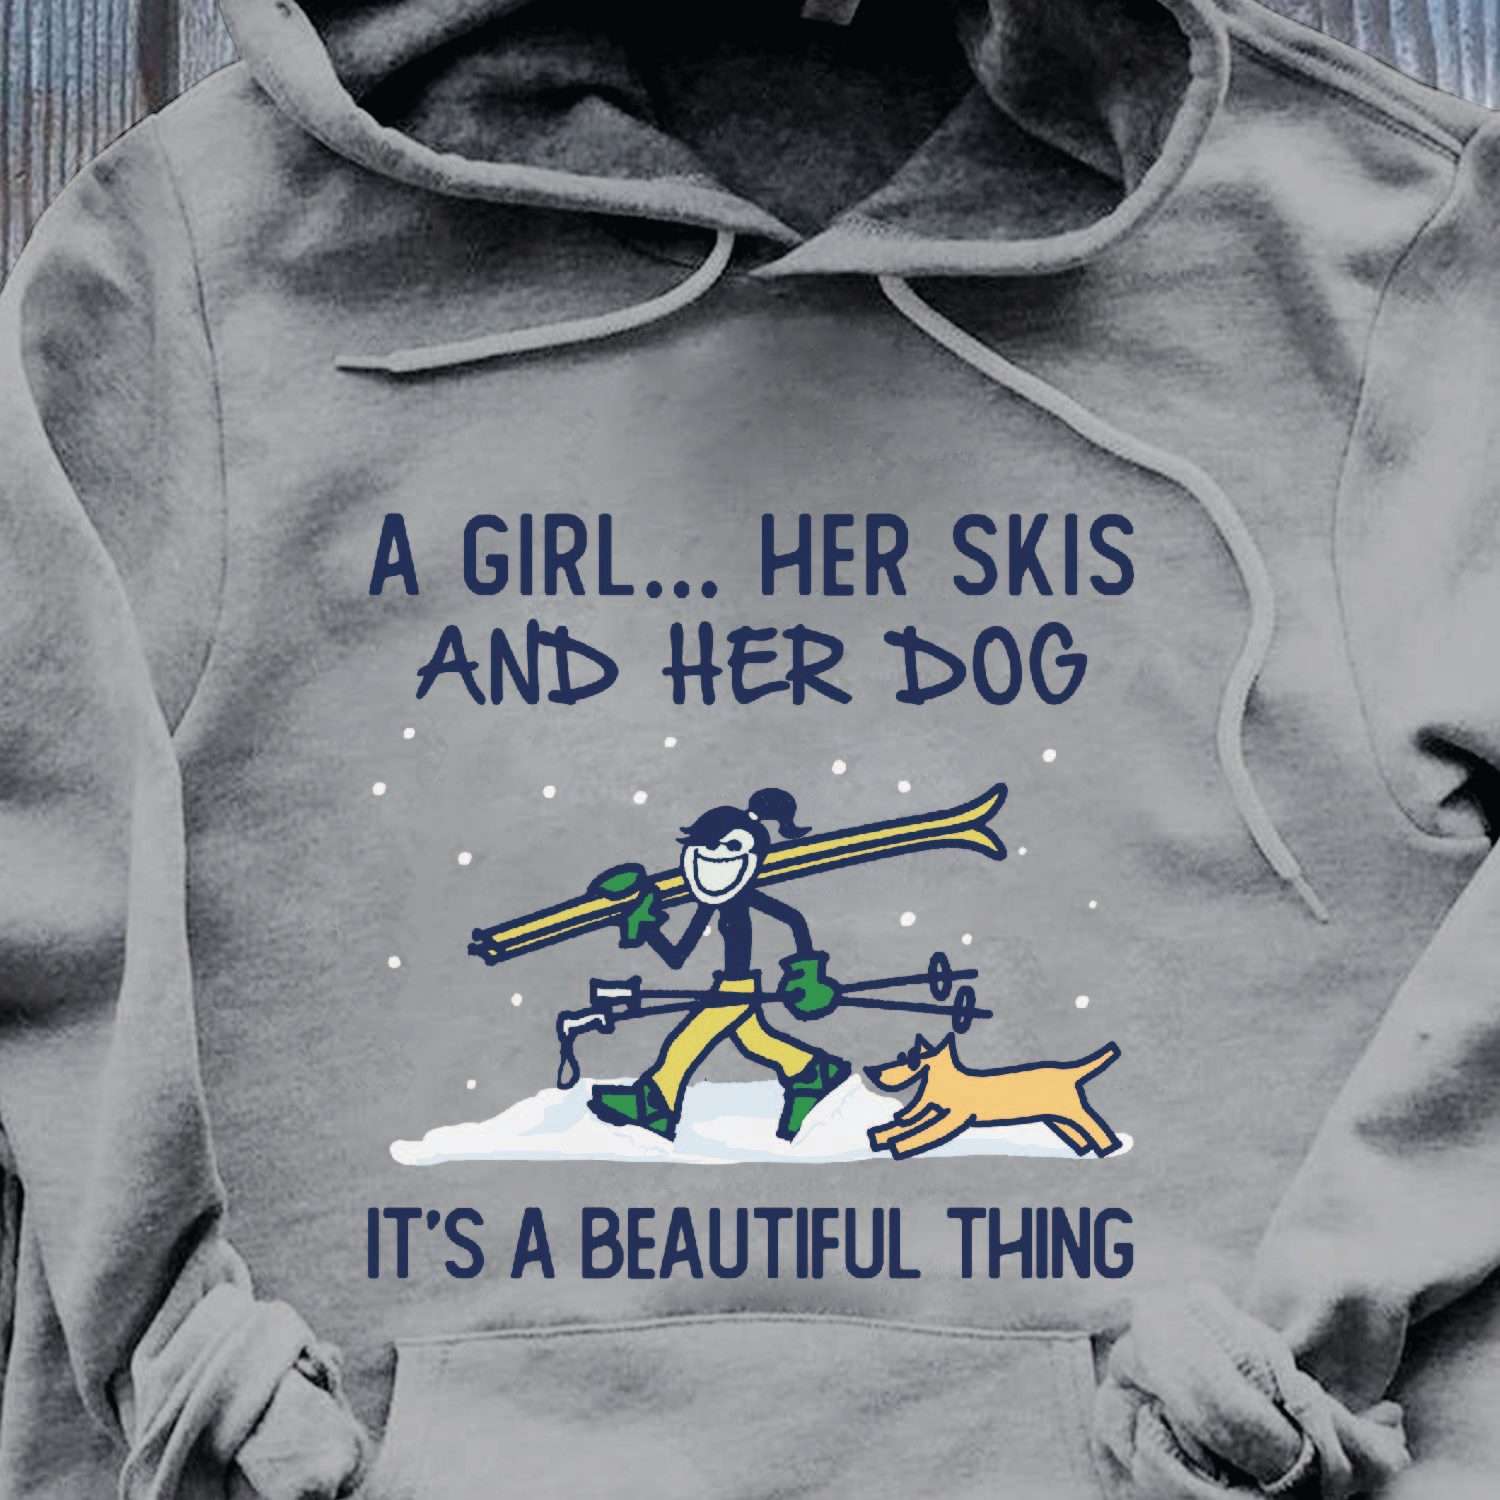 A girl her skis and her dog it's a beautiful thing - Girl go skiing, go skiing with dogs